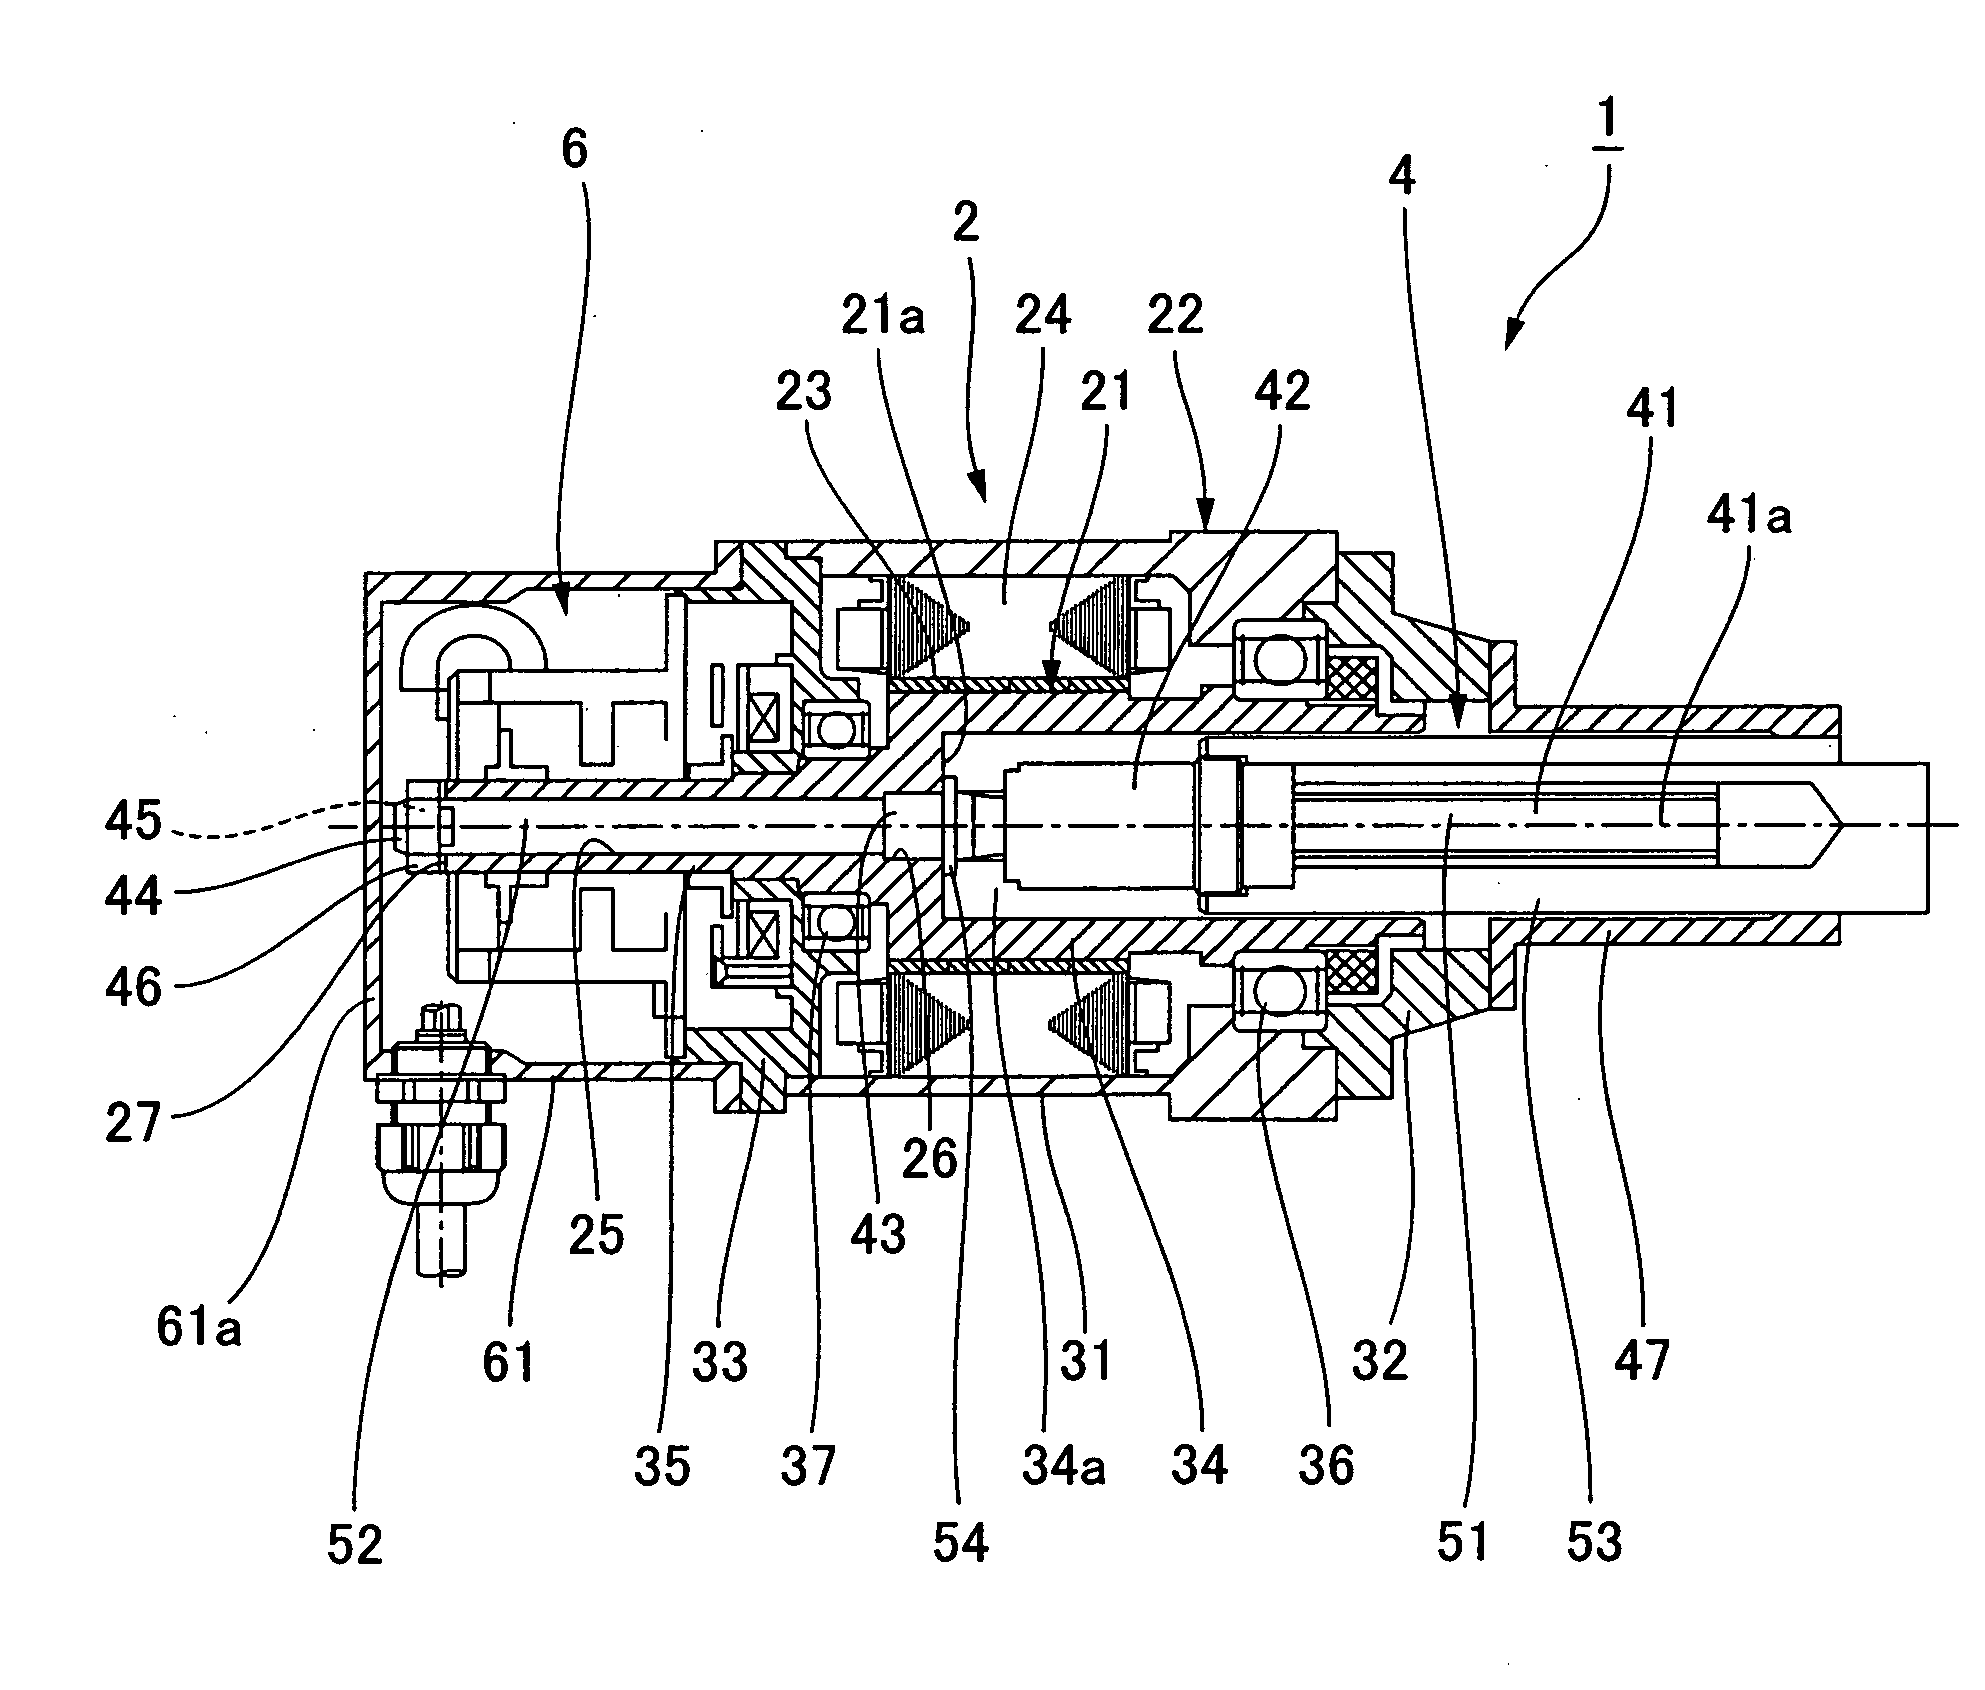 Method of Connecting and Fixing Ball Screw Shaft to Motor Shaft